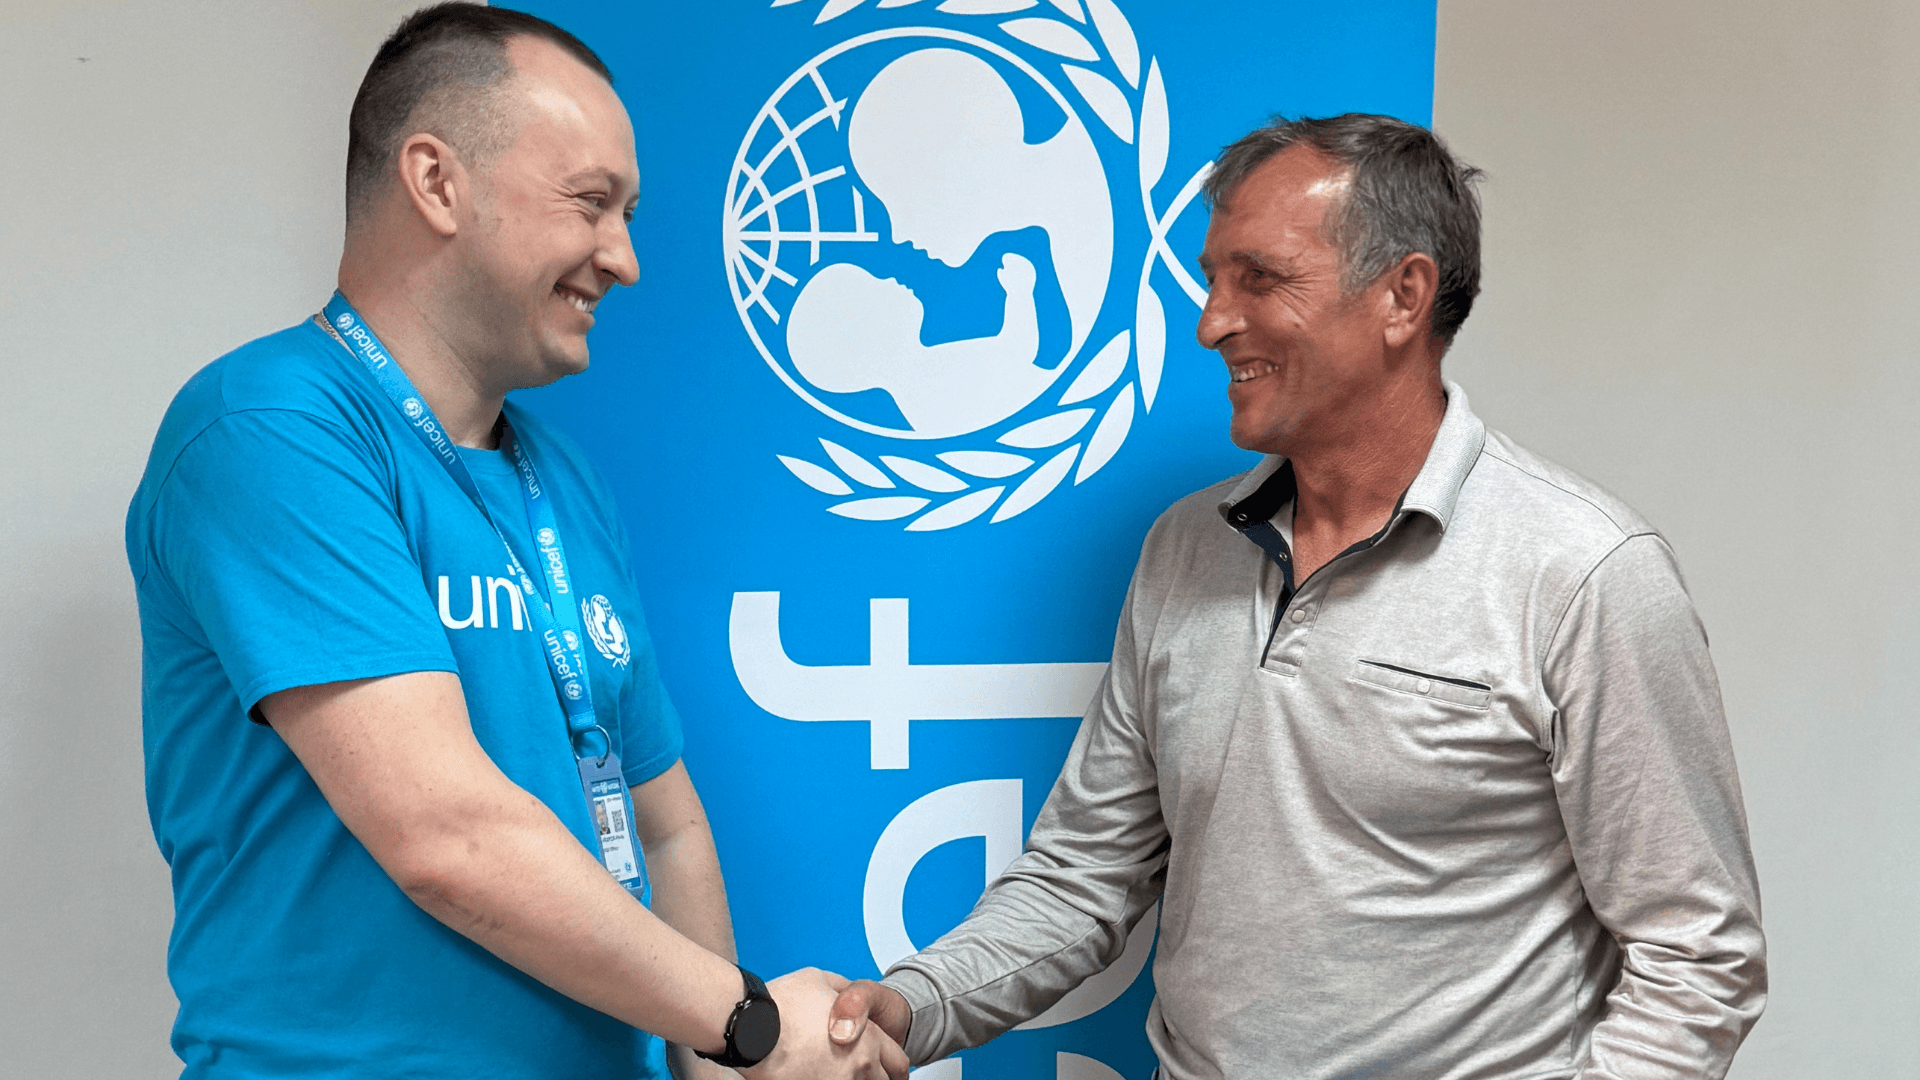 UNICEF to finance a water supply project in Kherson Oblast selected in the DREAM ecosystem